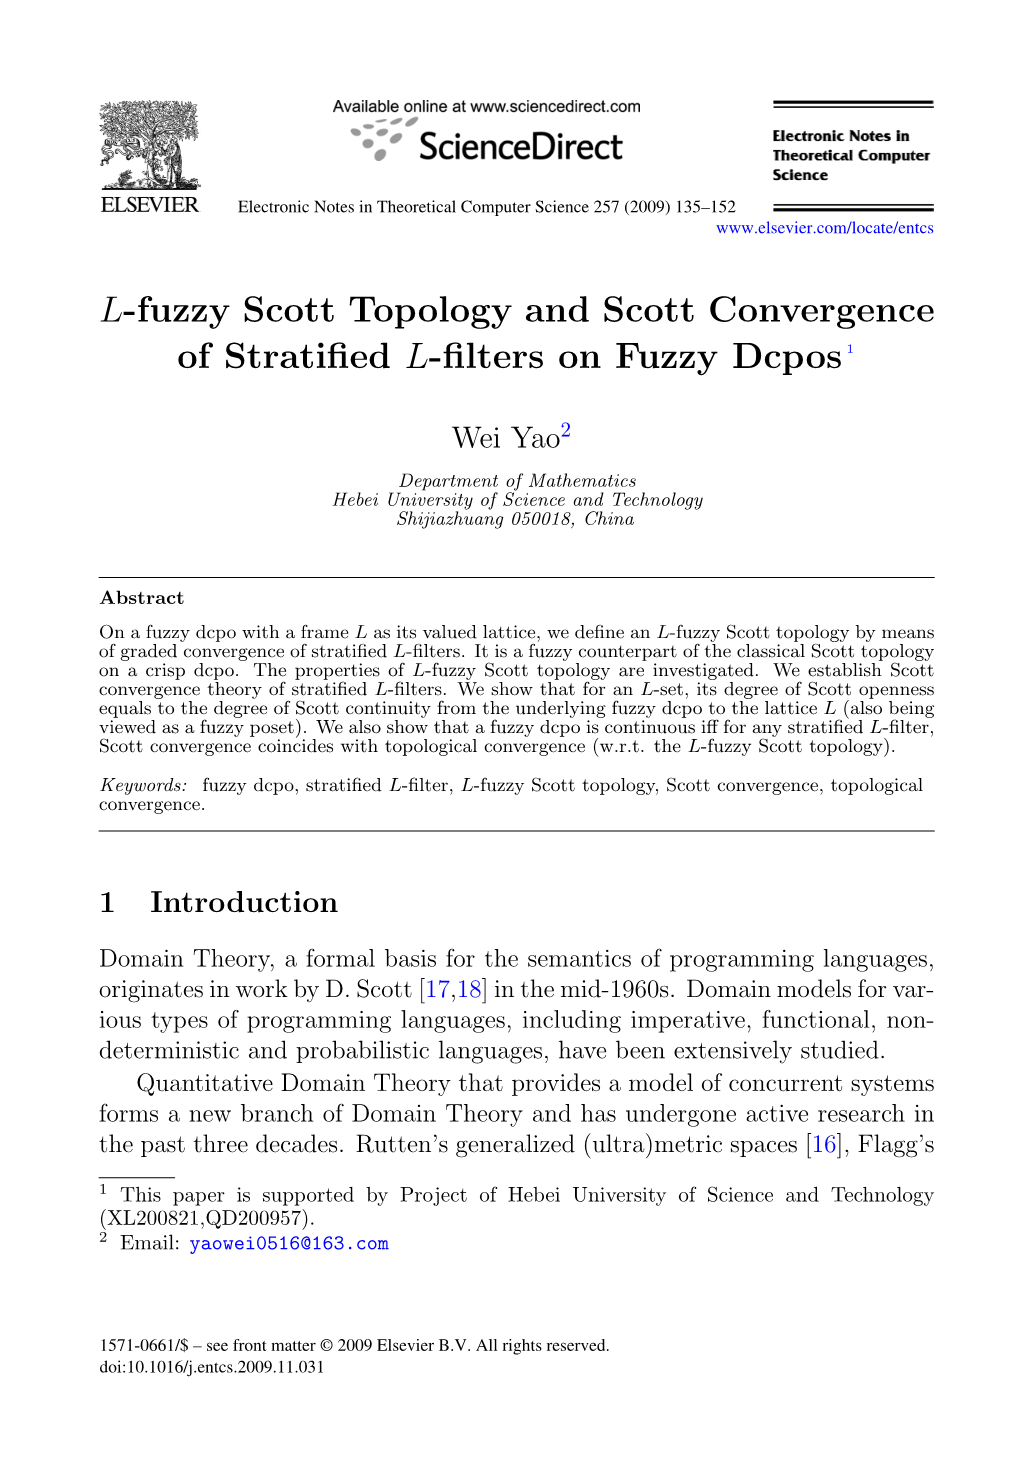 L-Fuzzy Scott Topology and Scott Convergence of Stratified L-Filters